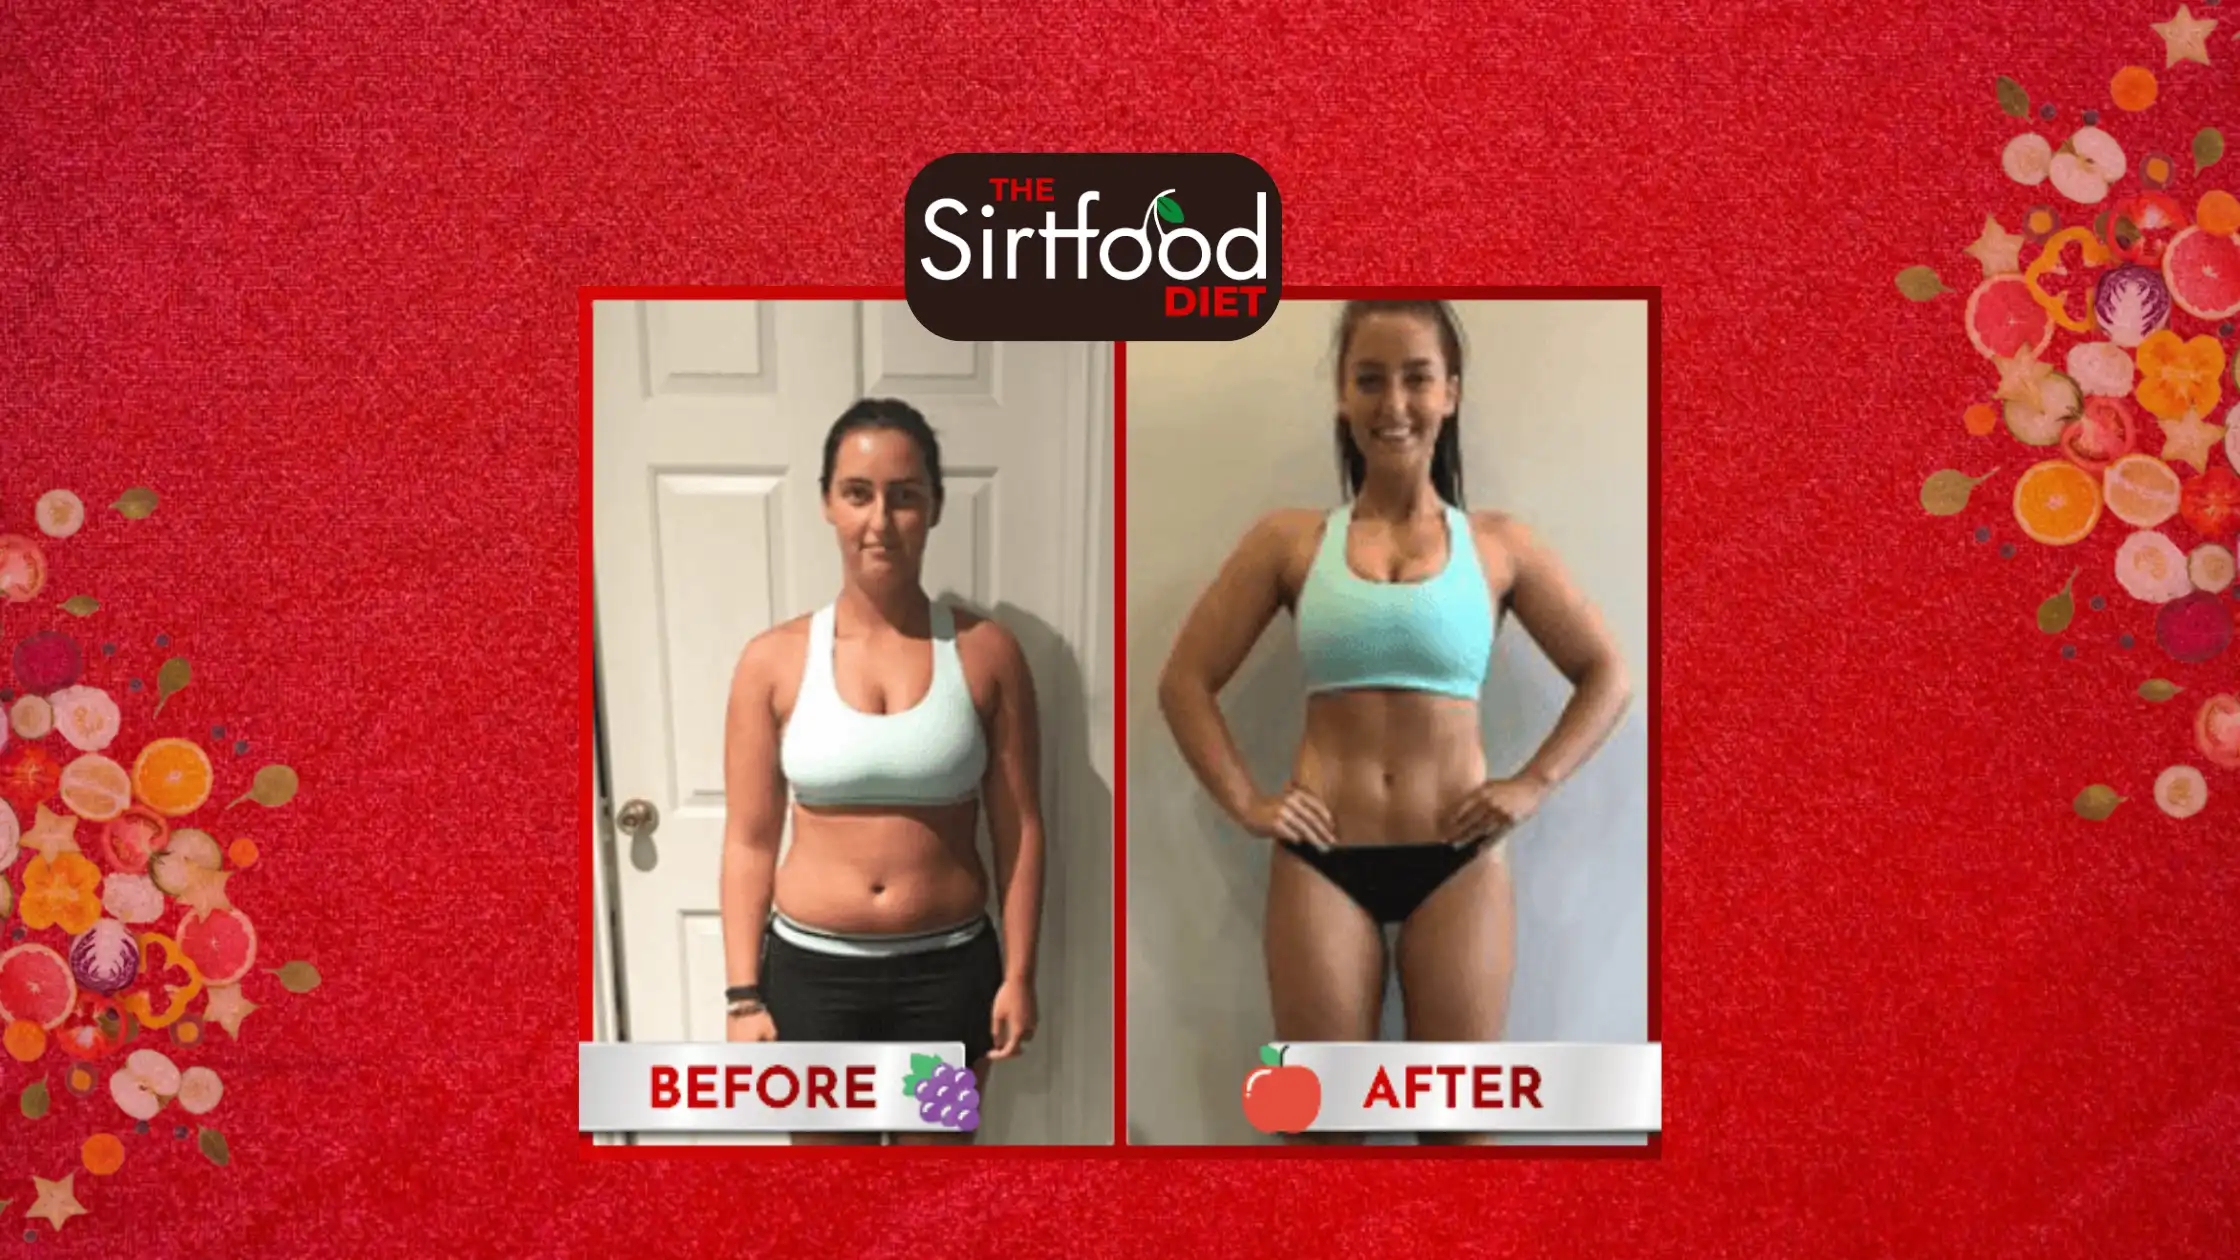 The Sirtfood Diet Results